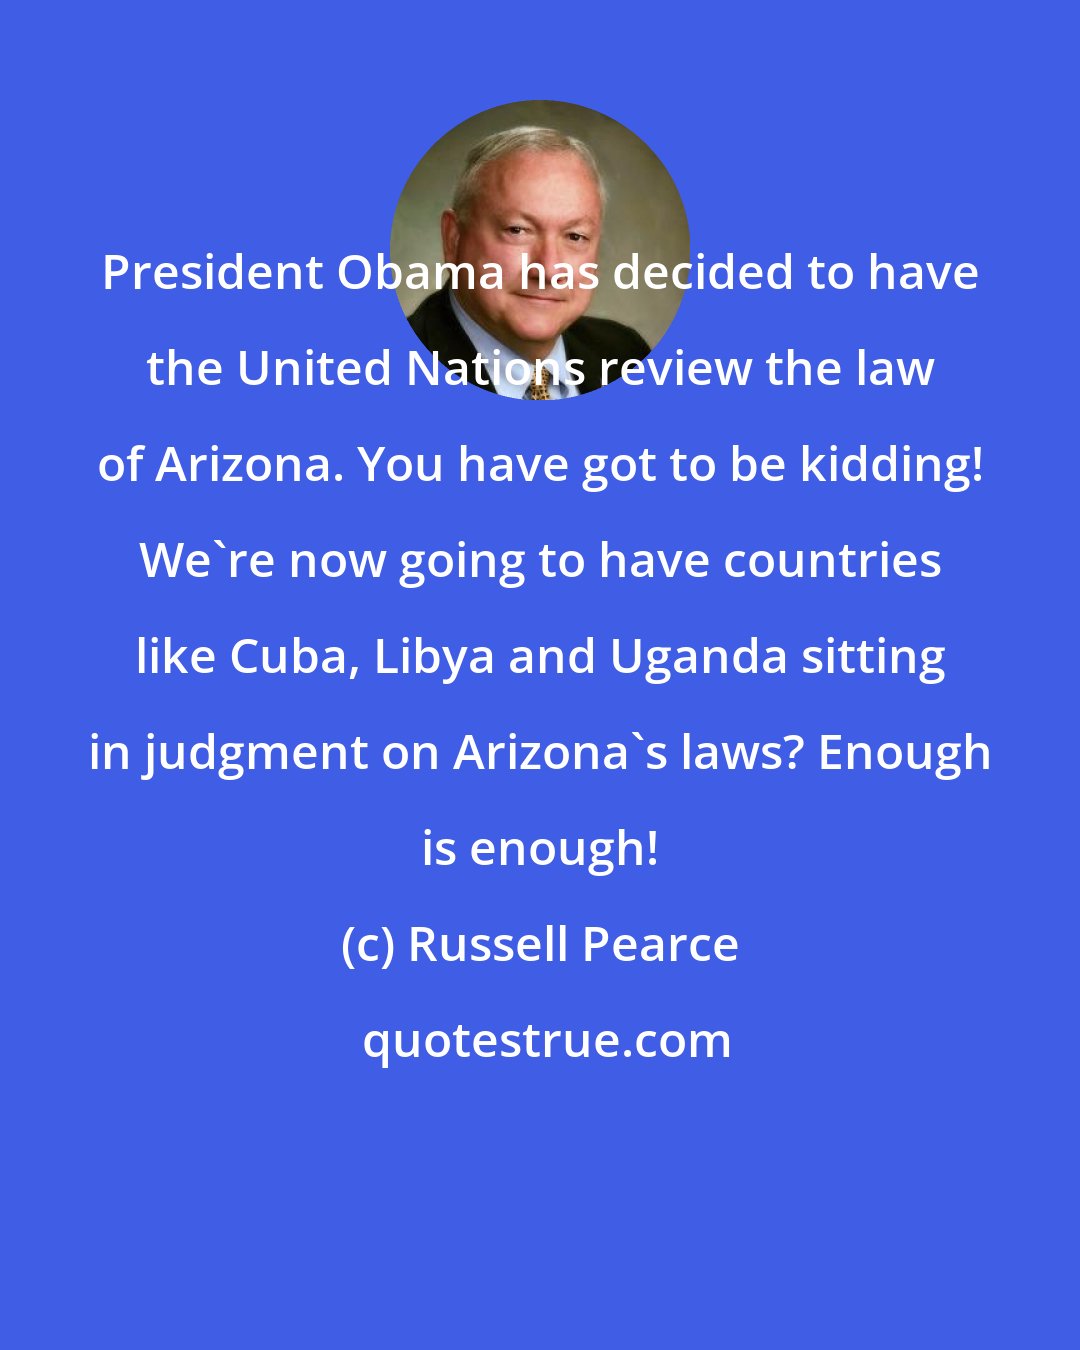 Russell Pearce: President Obama has decided to have the United Nations review the law of Arizona. You have got to be kidding! We're now going to have countries like Cuba, Libya and Uganda sitting in judgment on Arizona's laws? Enough is enough!